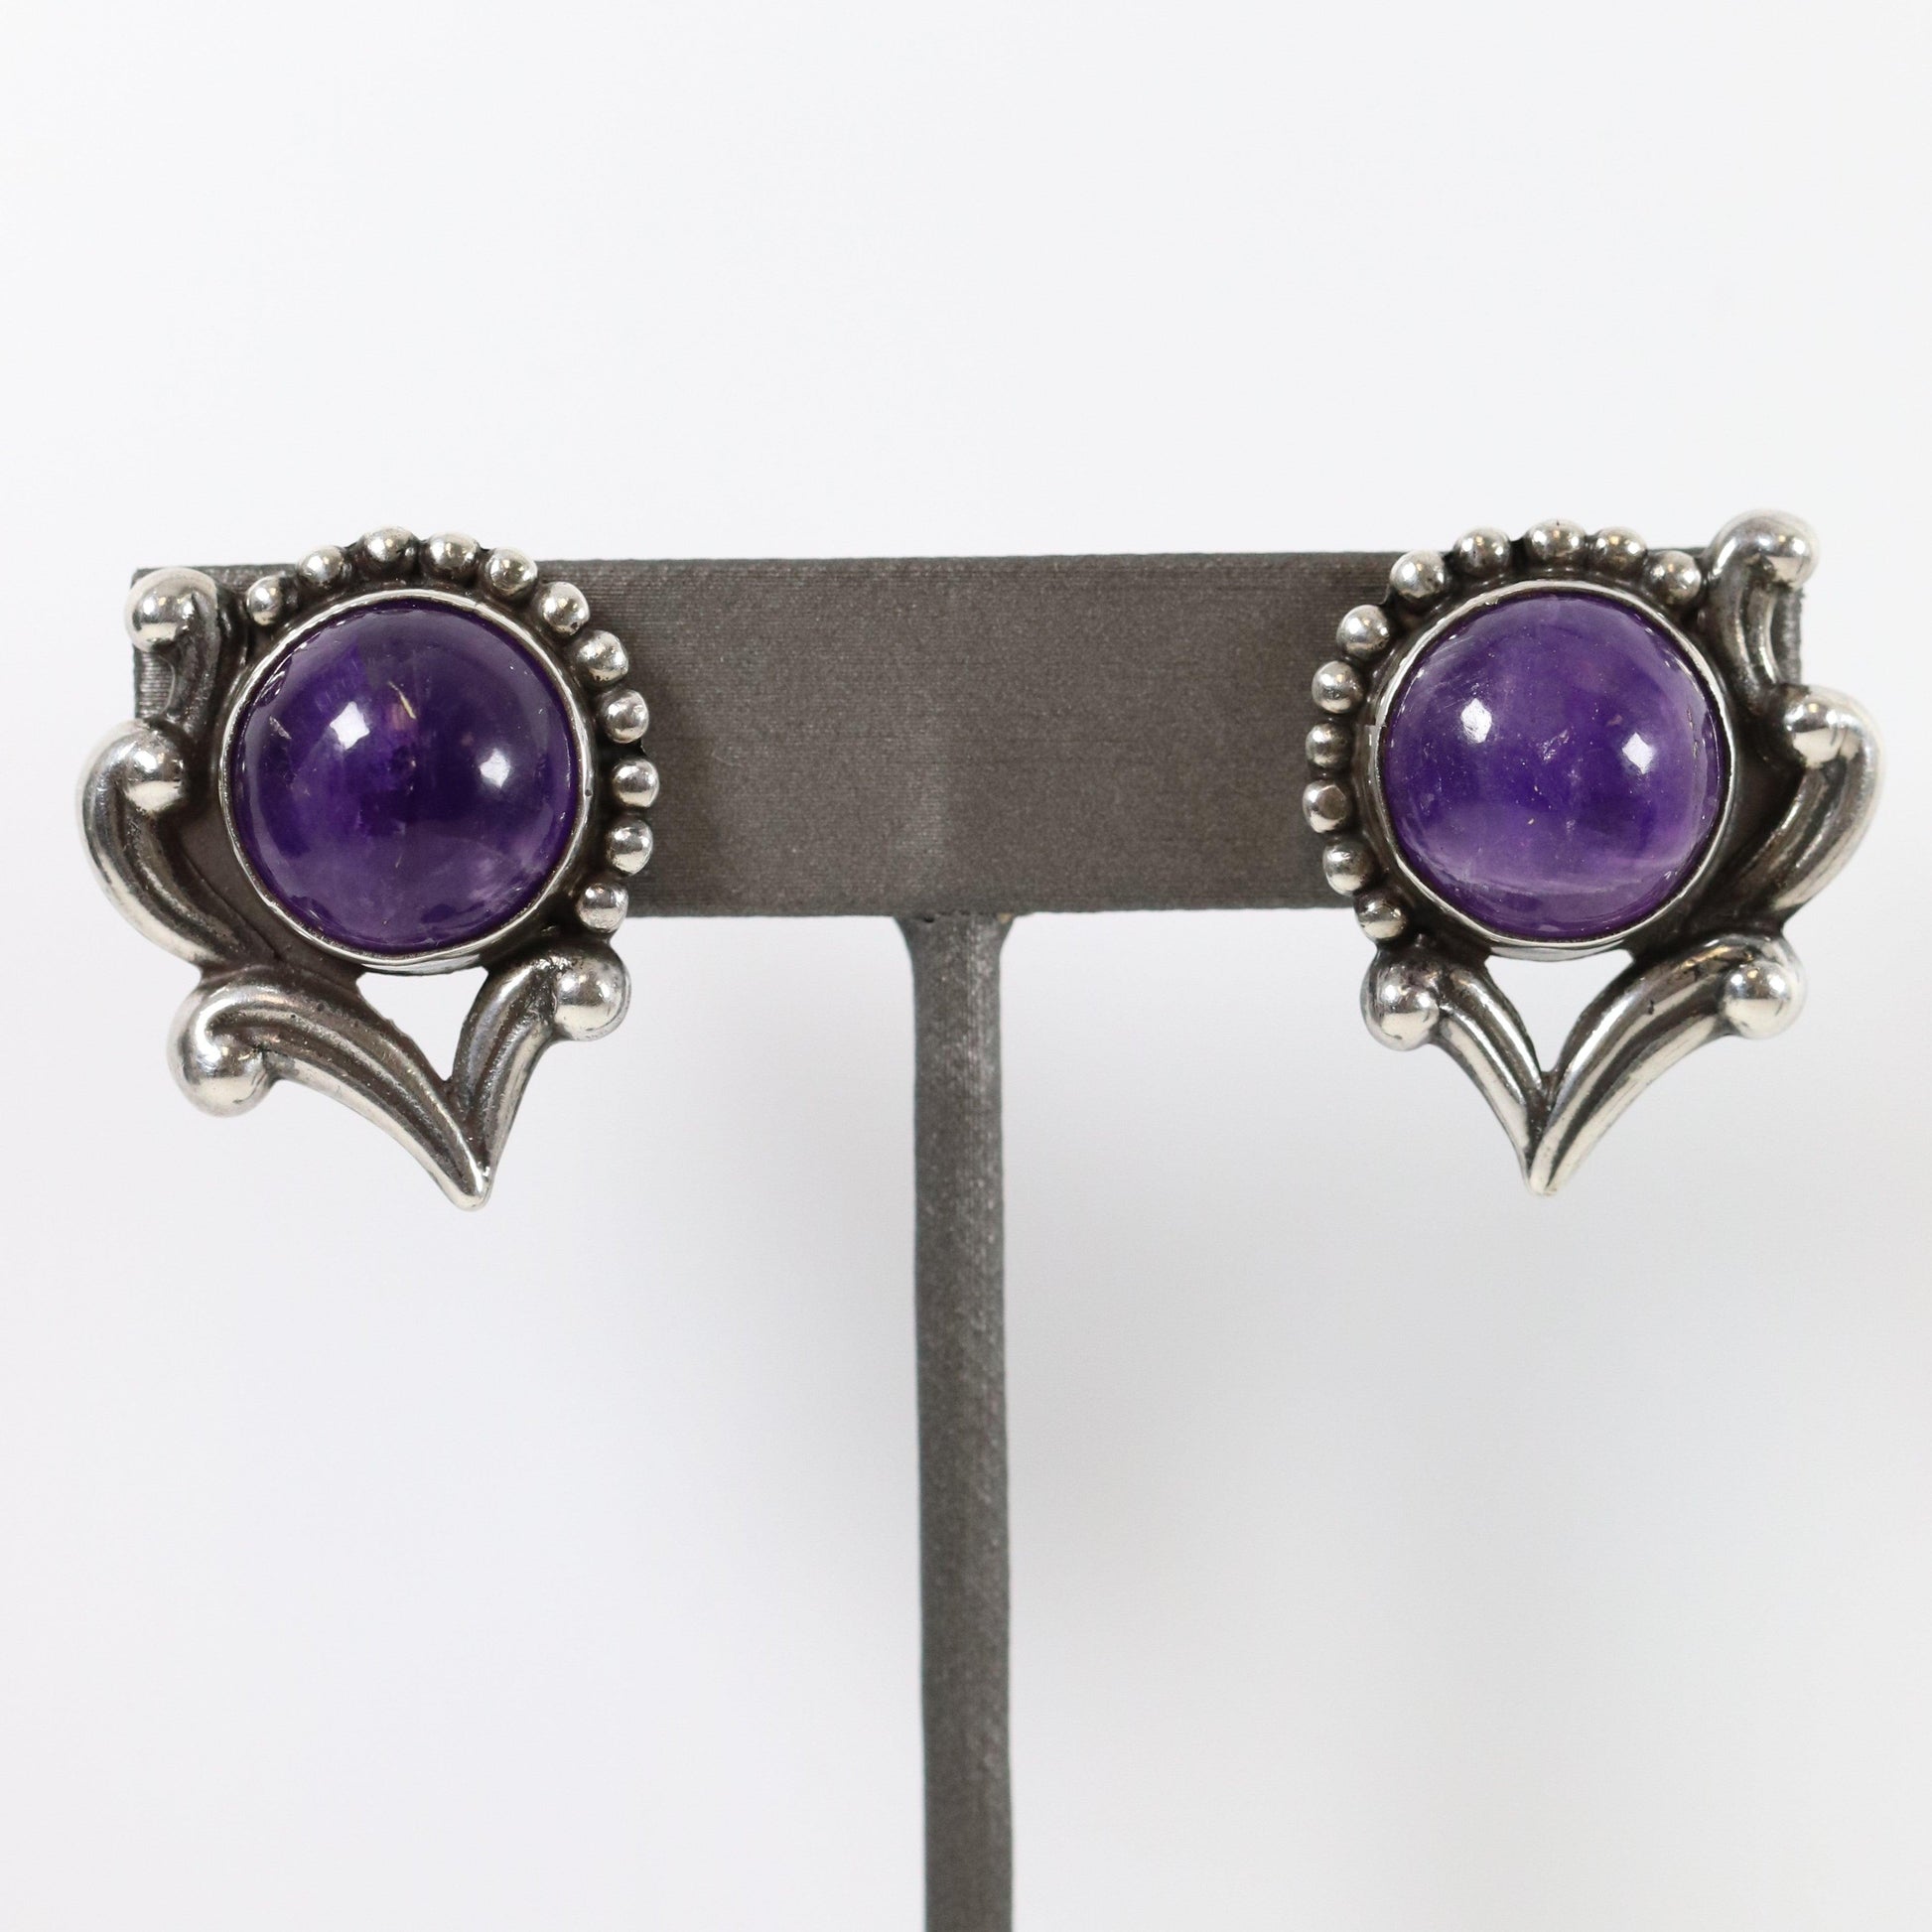 Vintage Los Castillo Taxco Silver Mexican Jewelry | Floral Handcrafted Amethyst Earrings - Carmel Fine Silver Jewelry